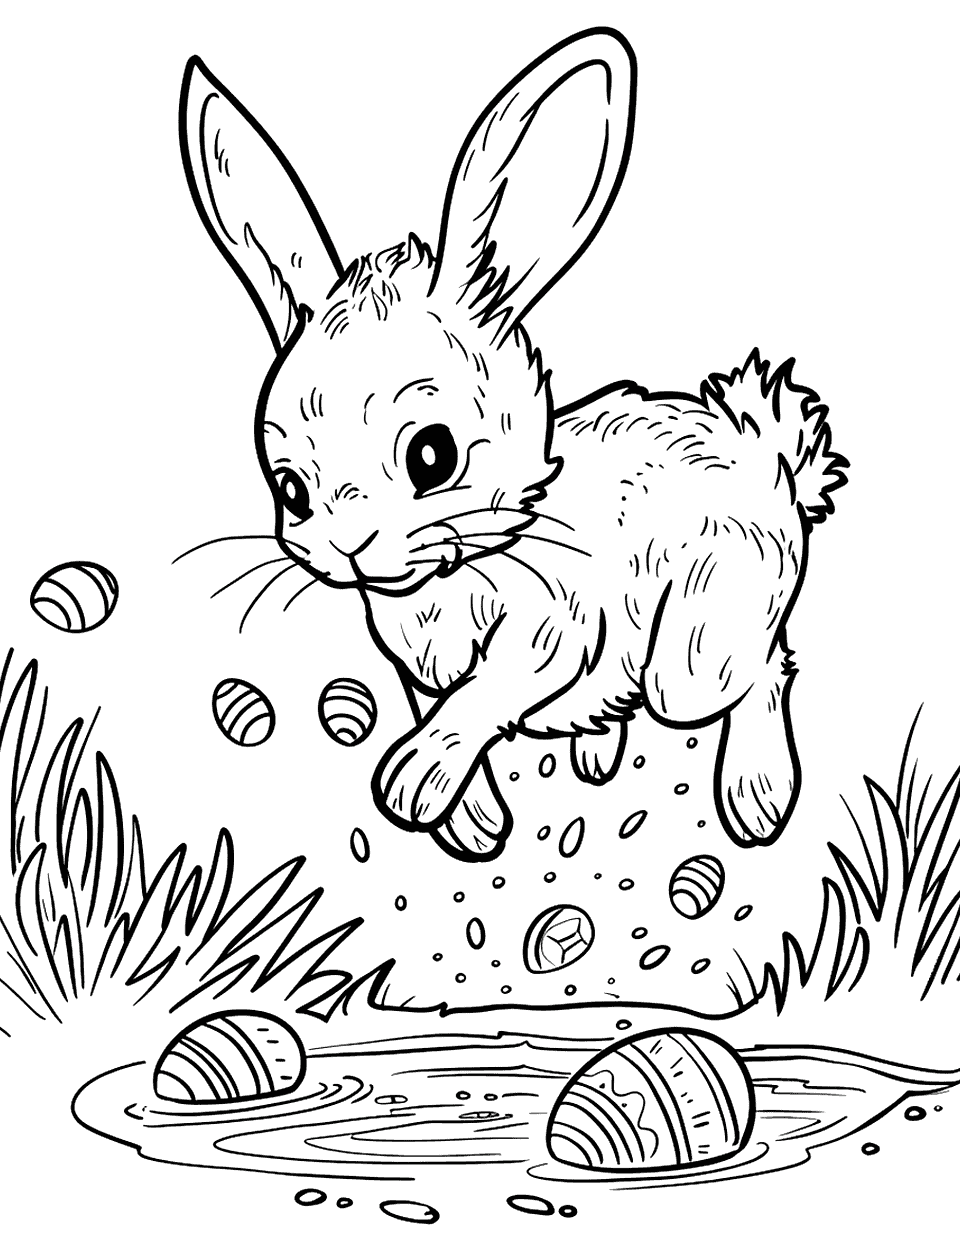 Sunrise Egg Discovery Easter Bunny Coloring Page - A bunny finding an Easter egg in the grass as the sun rises, casting a soft light over the scene.